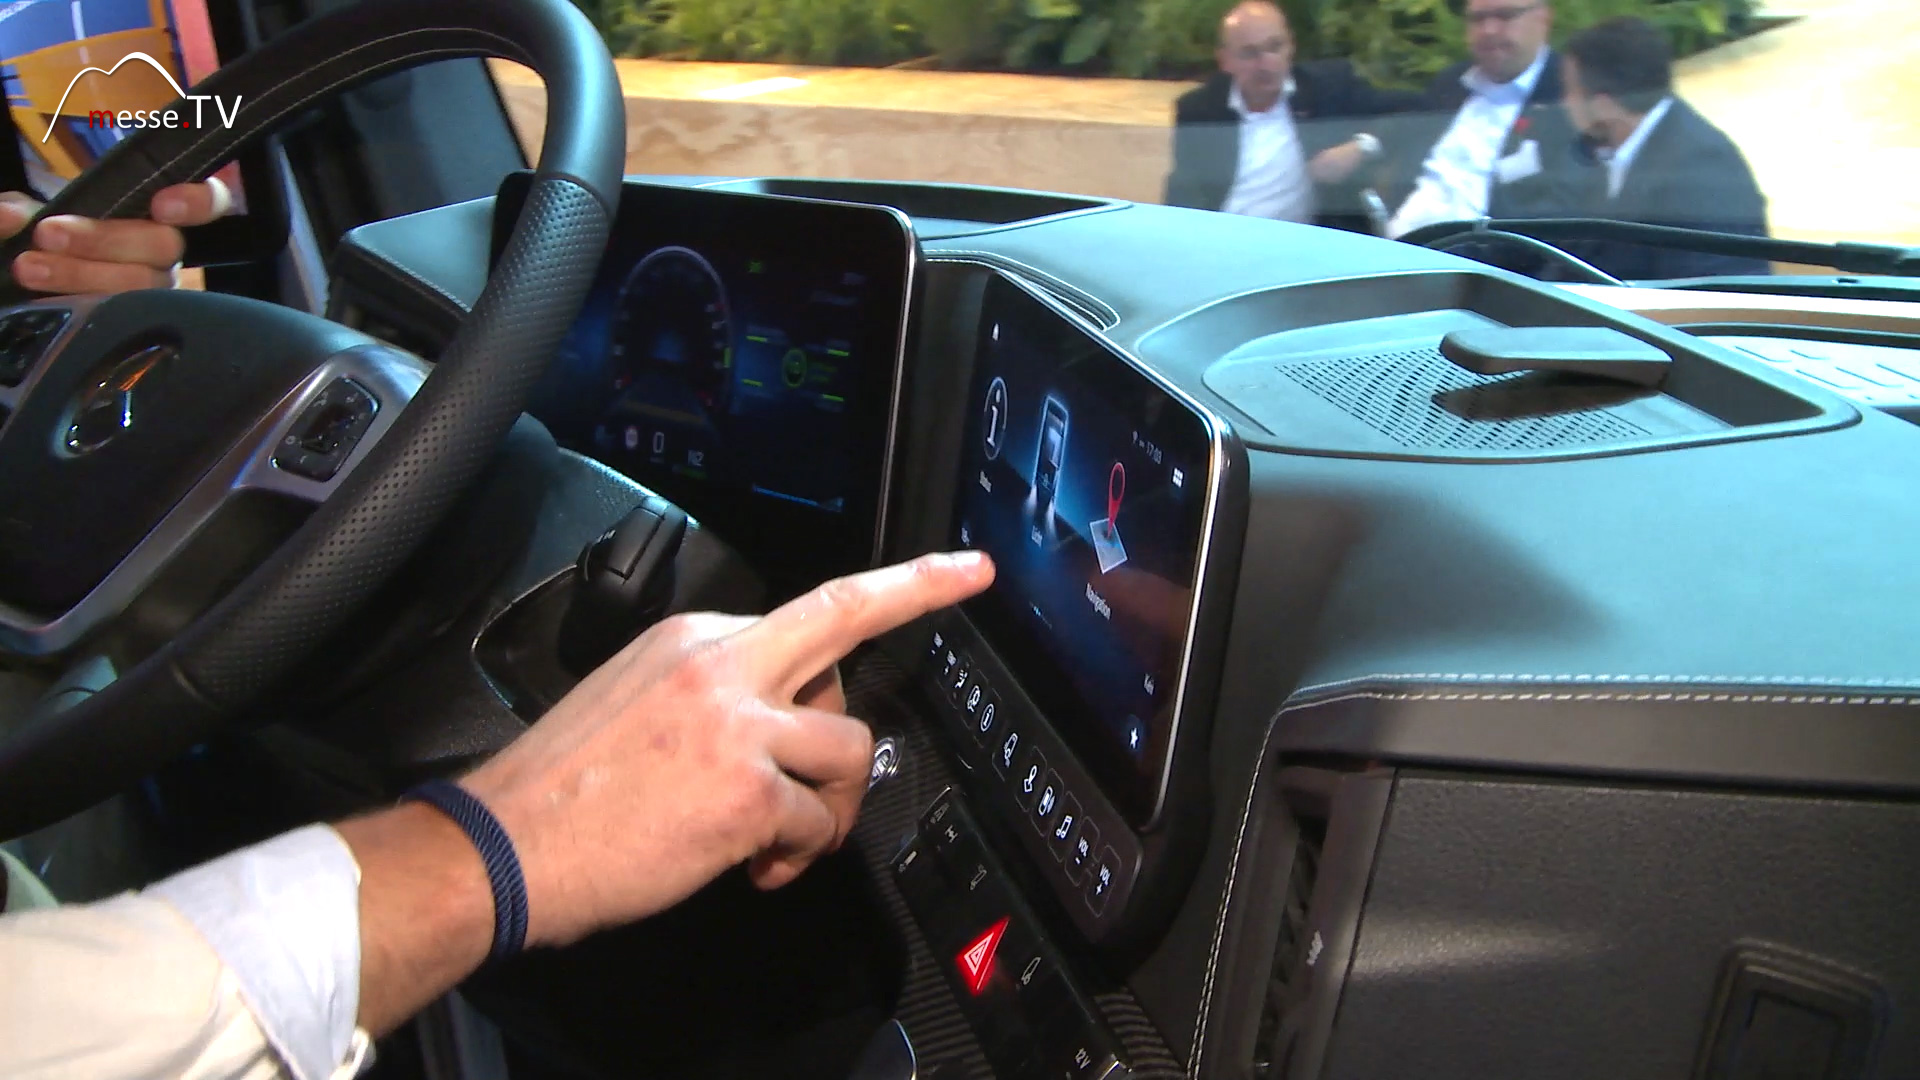 Mercedes Benz Truck App secondary display integrated into the truck